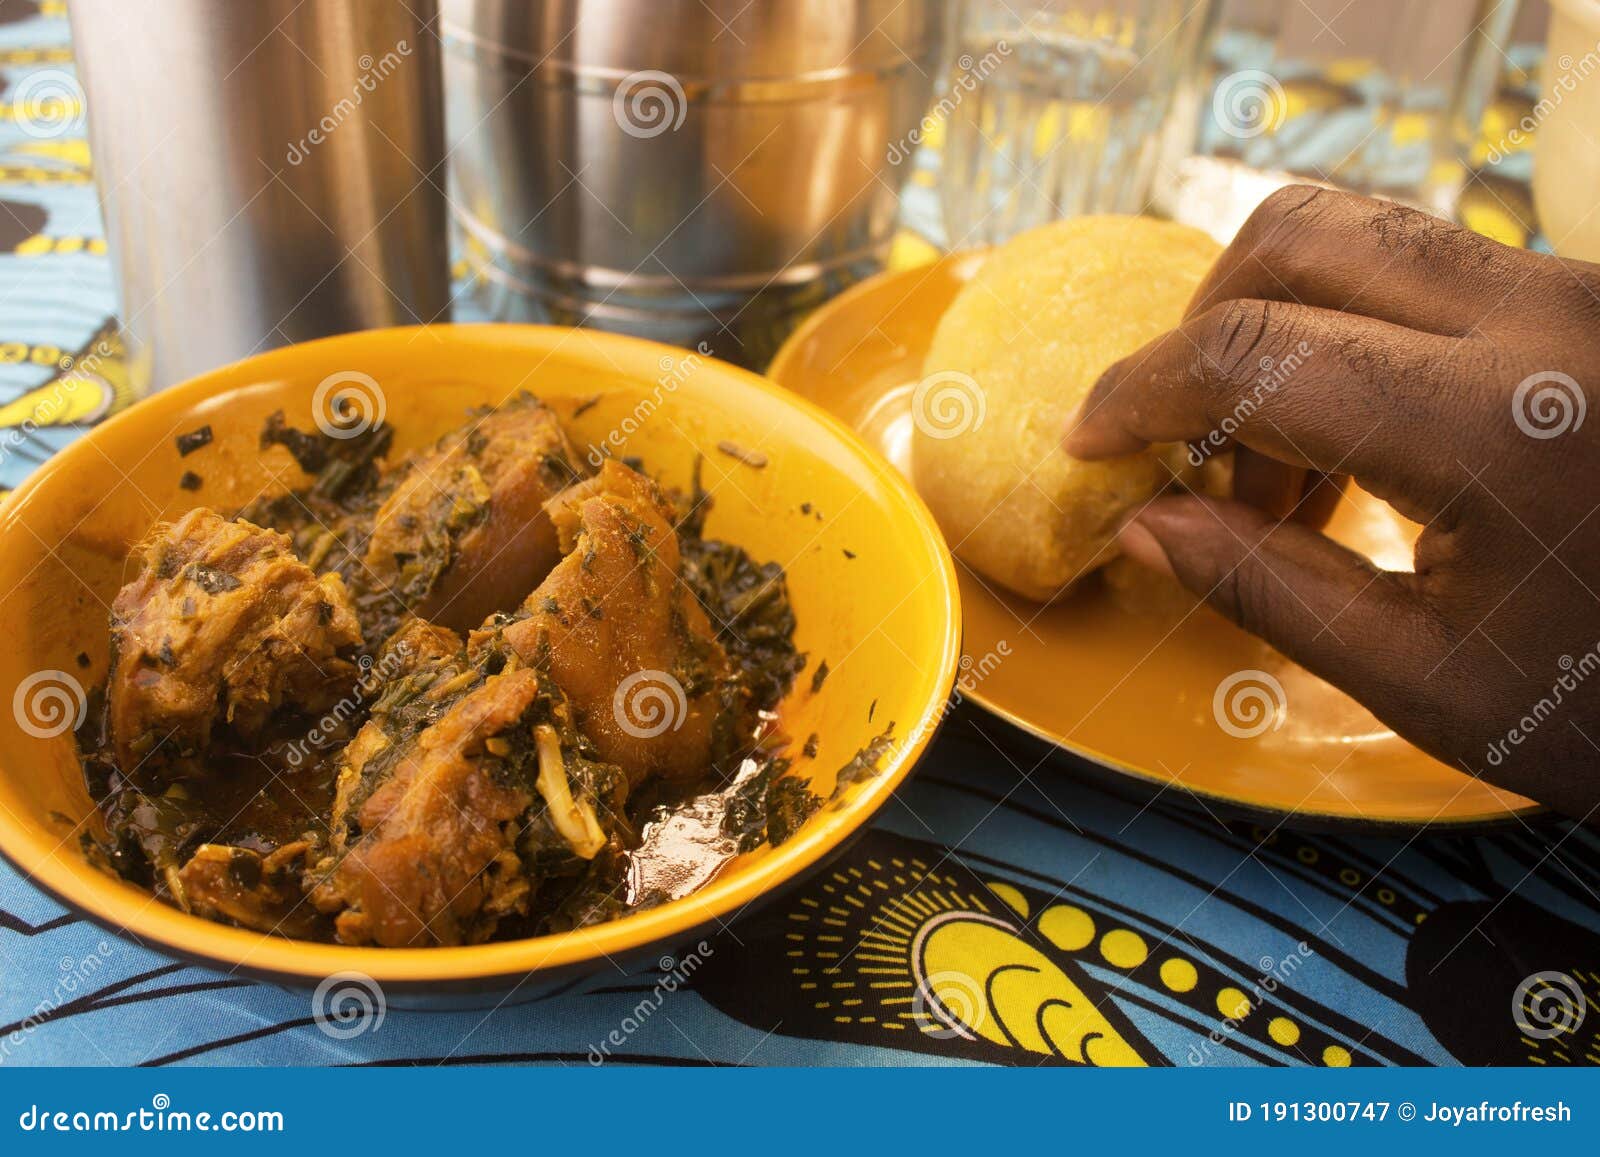 eating a yummy meal of nigerian garri or eba and vegetable soup